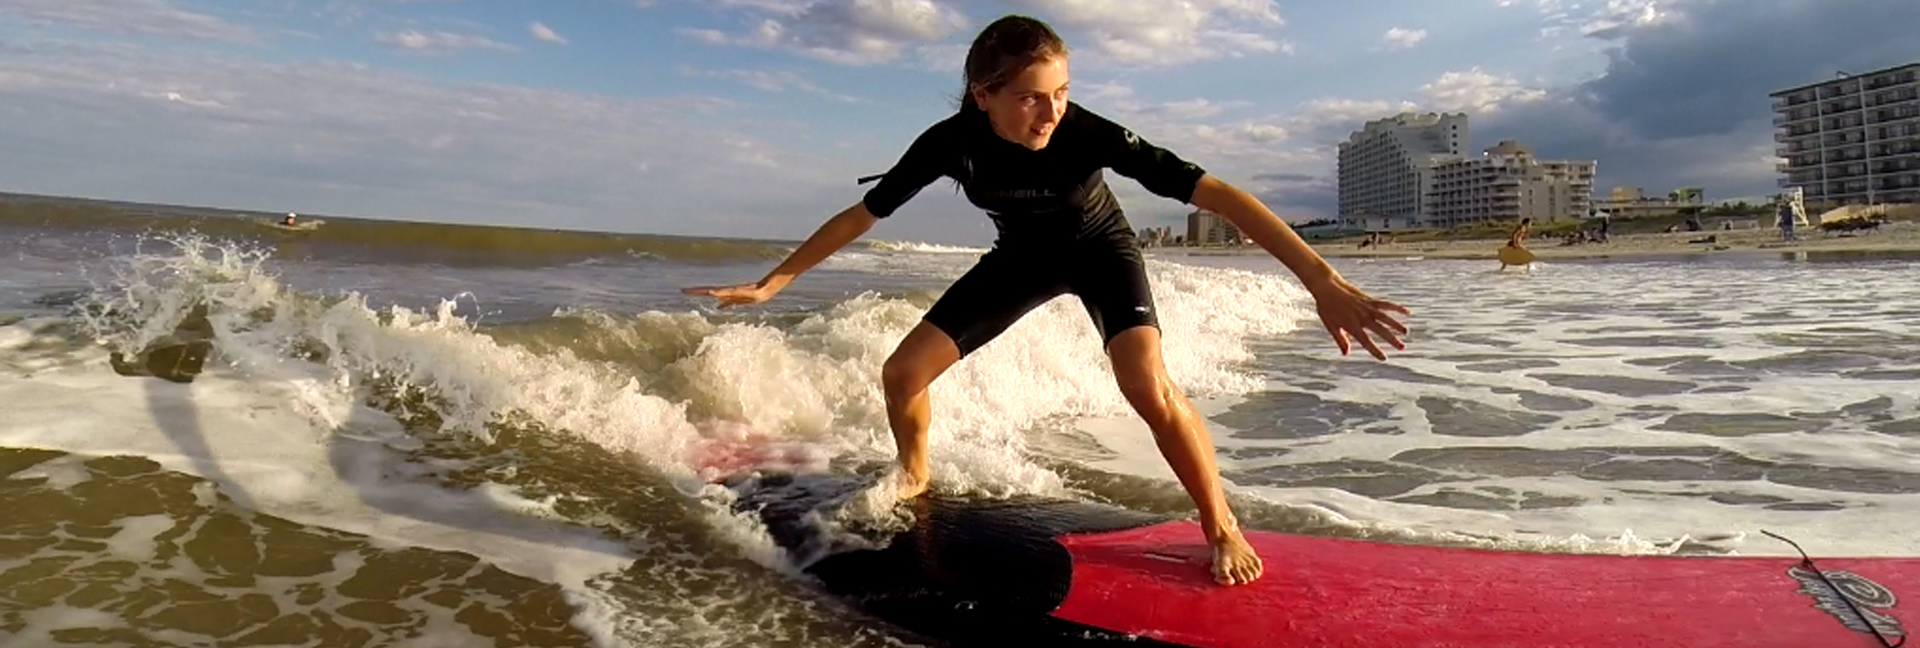 girl balances on red surfboard in black wetsuit